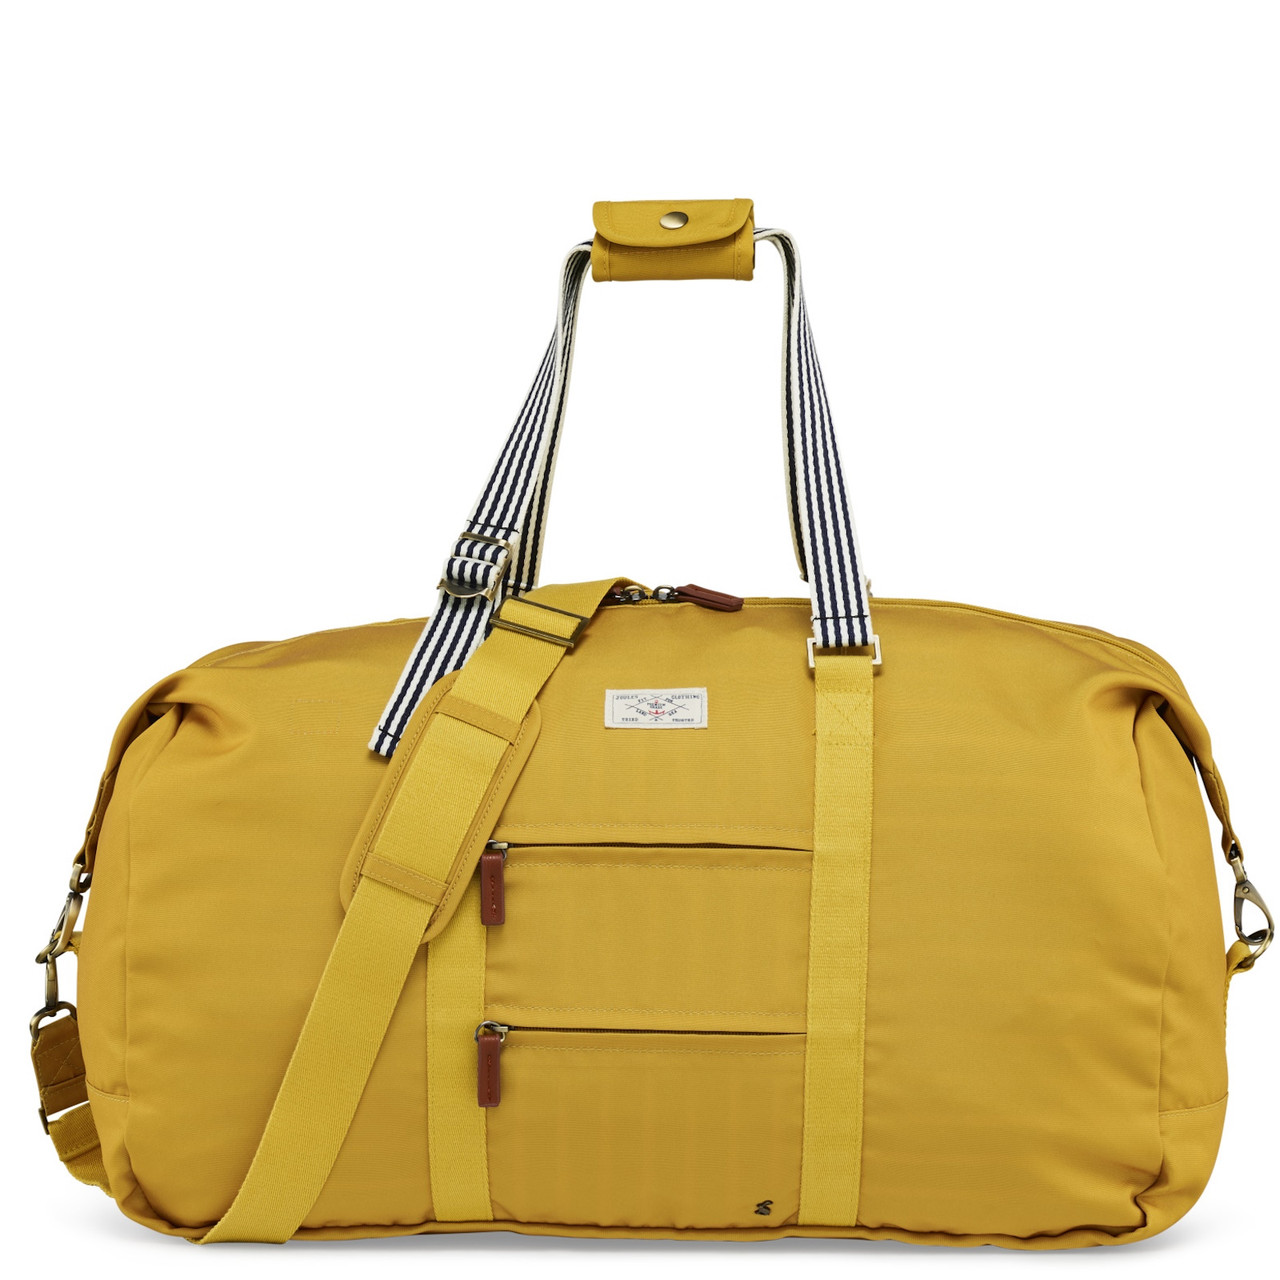 Joules Coast 54cm Duffle Bag at Luggage Superstore